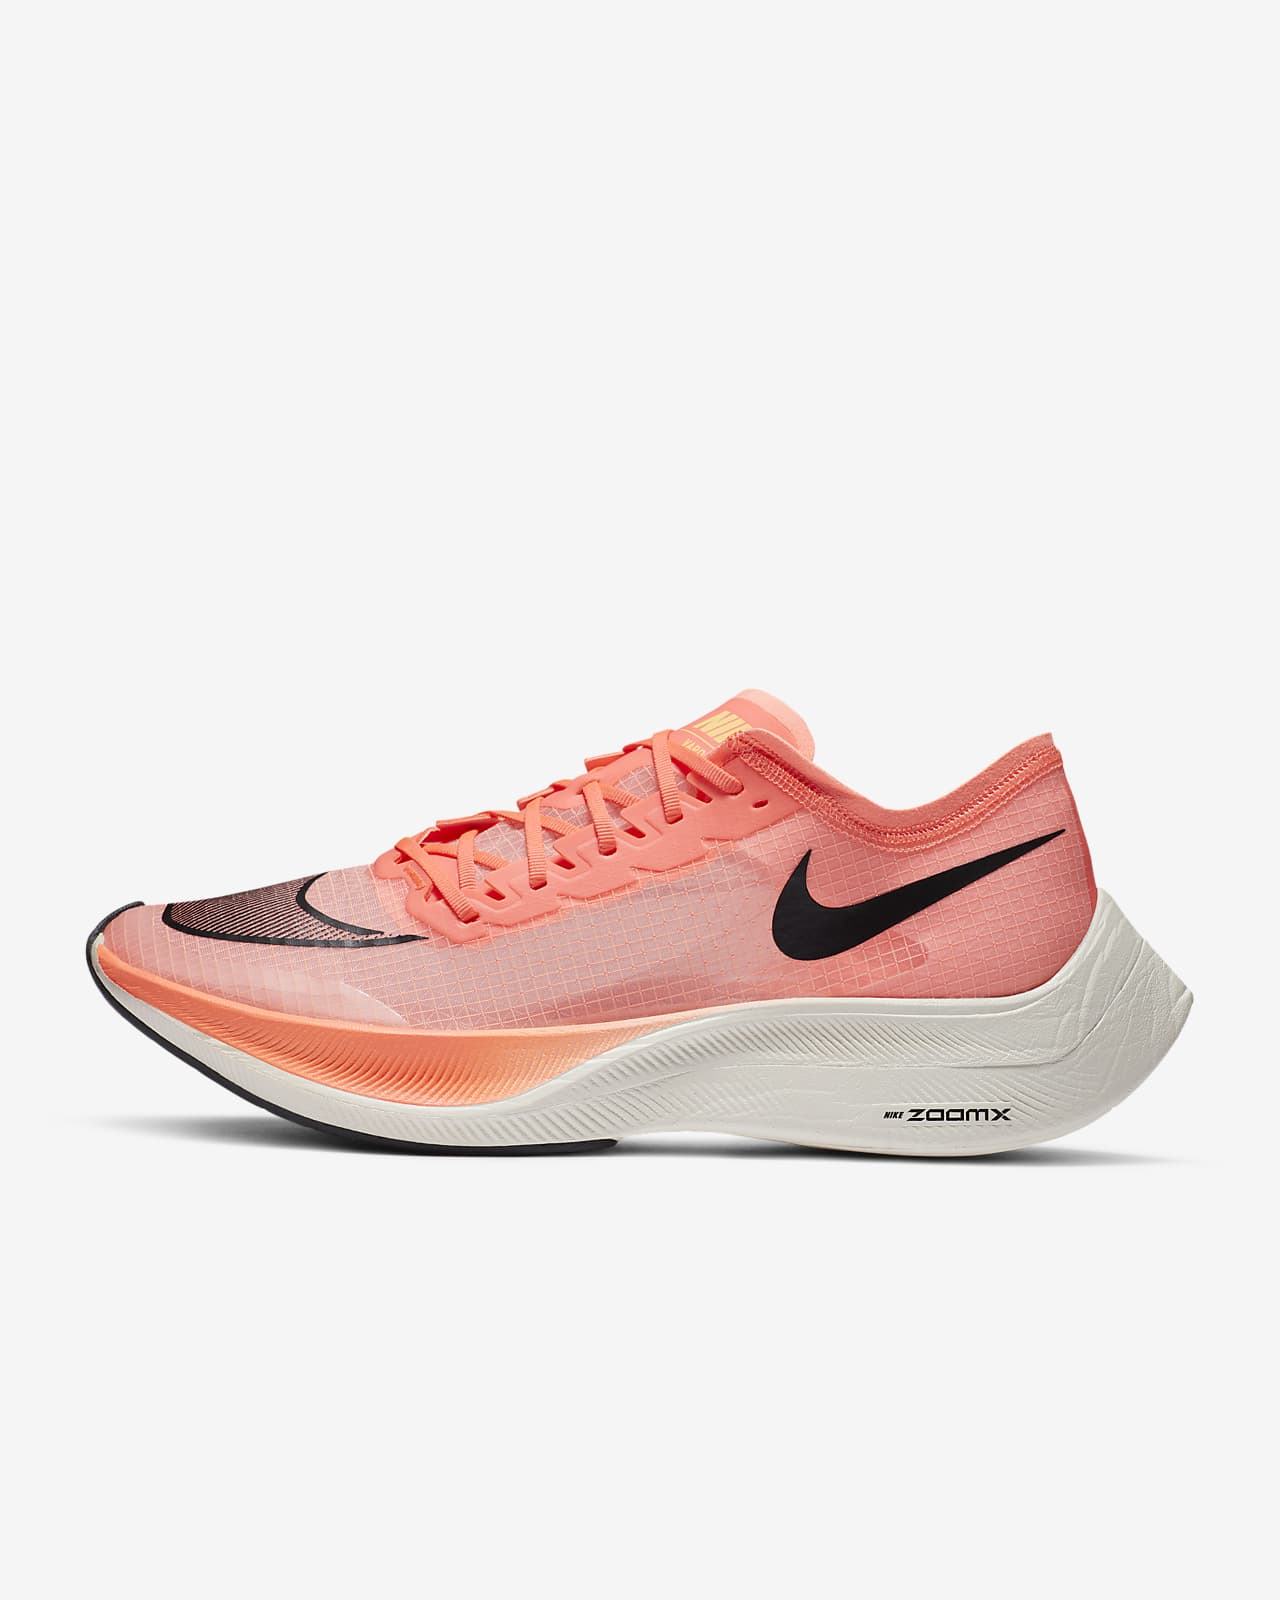 nike zoomx fly